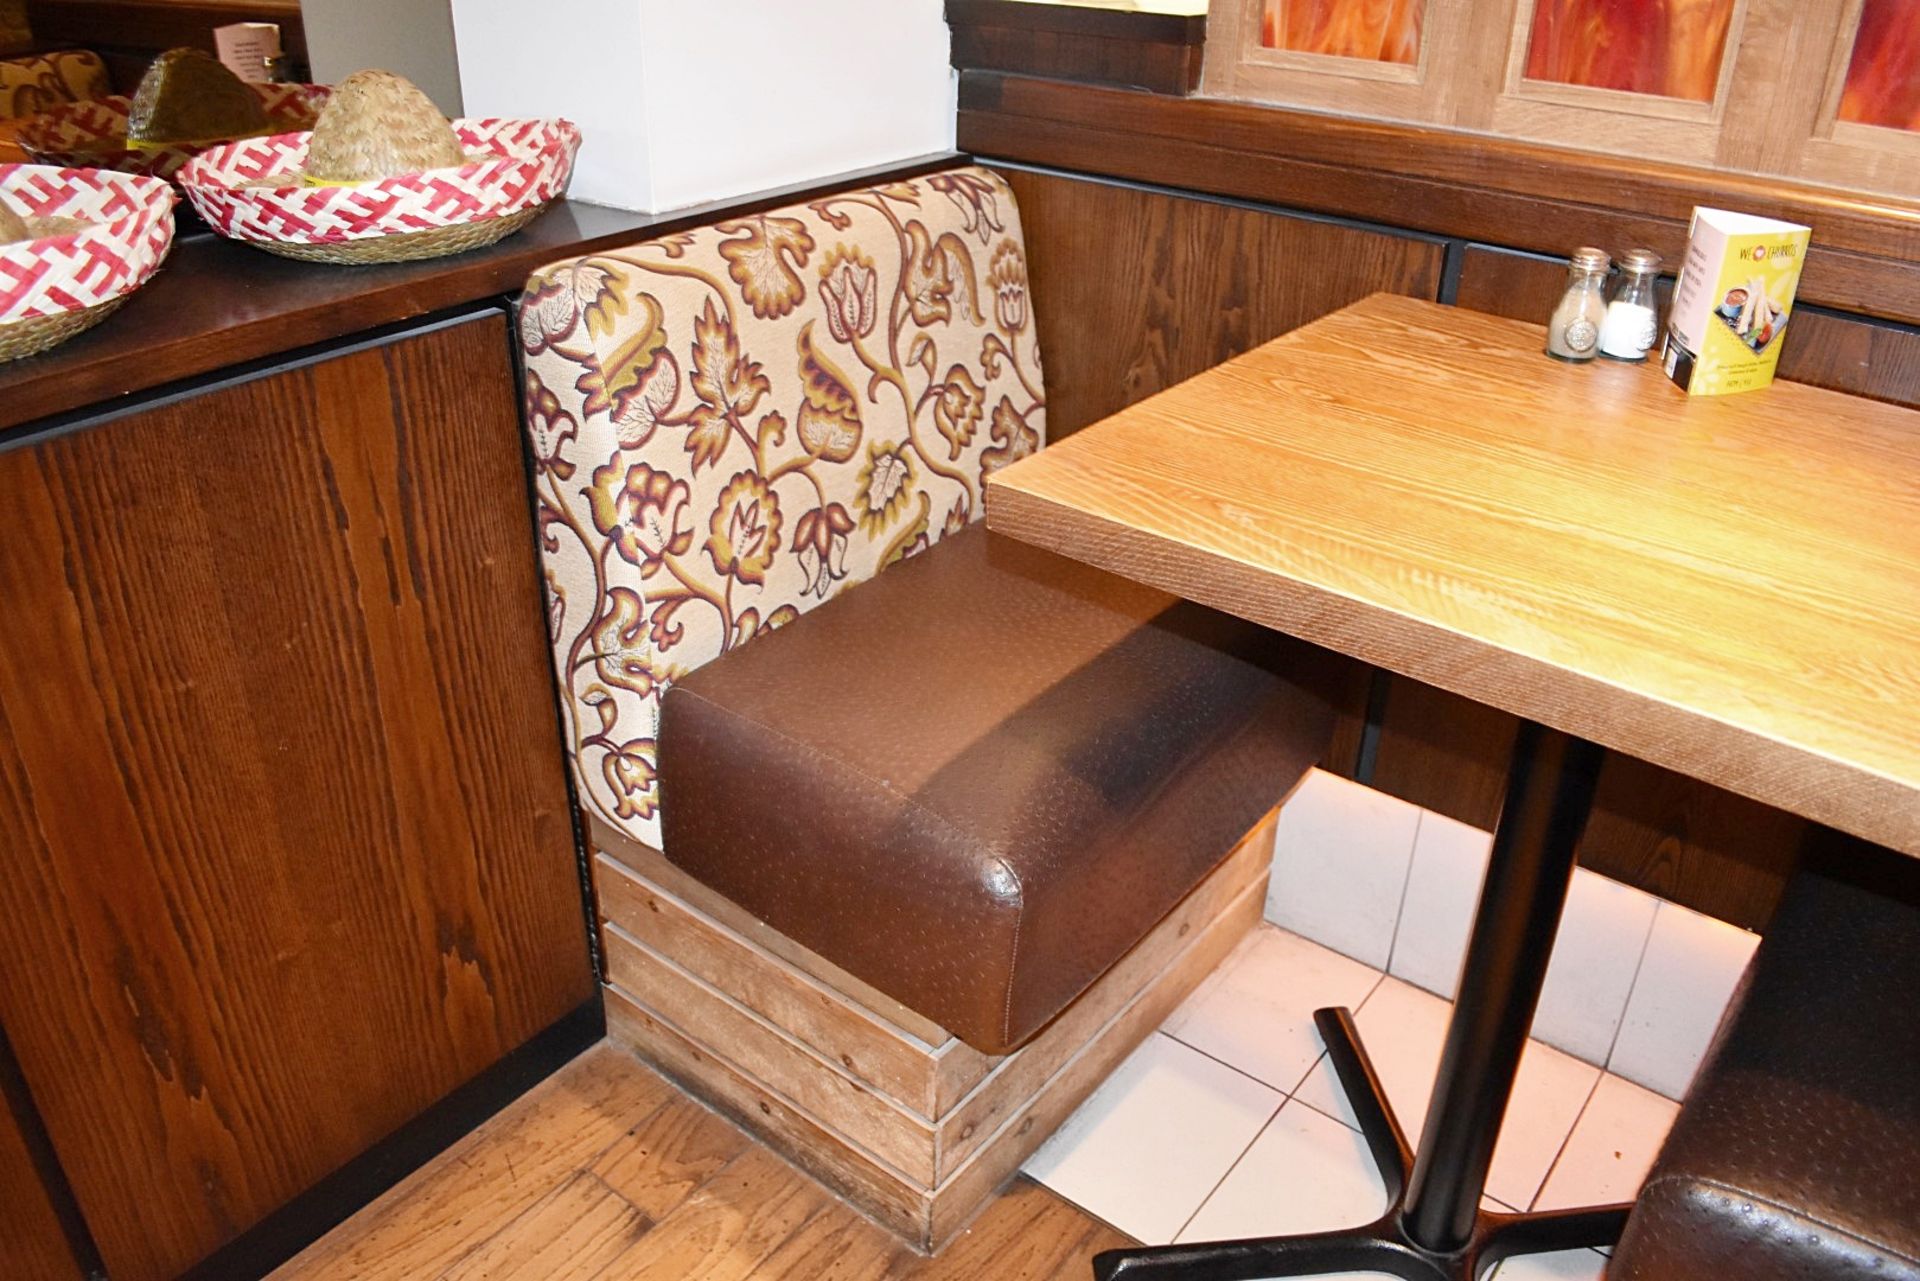 15-Pieces Of Restaurant Booth Seating Of Varying Length - Image 2 of 22